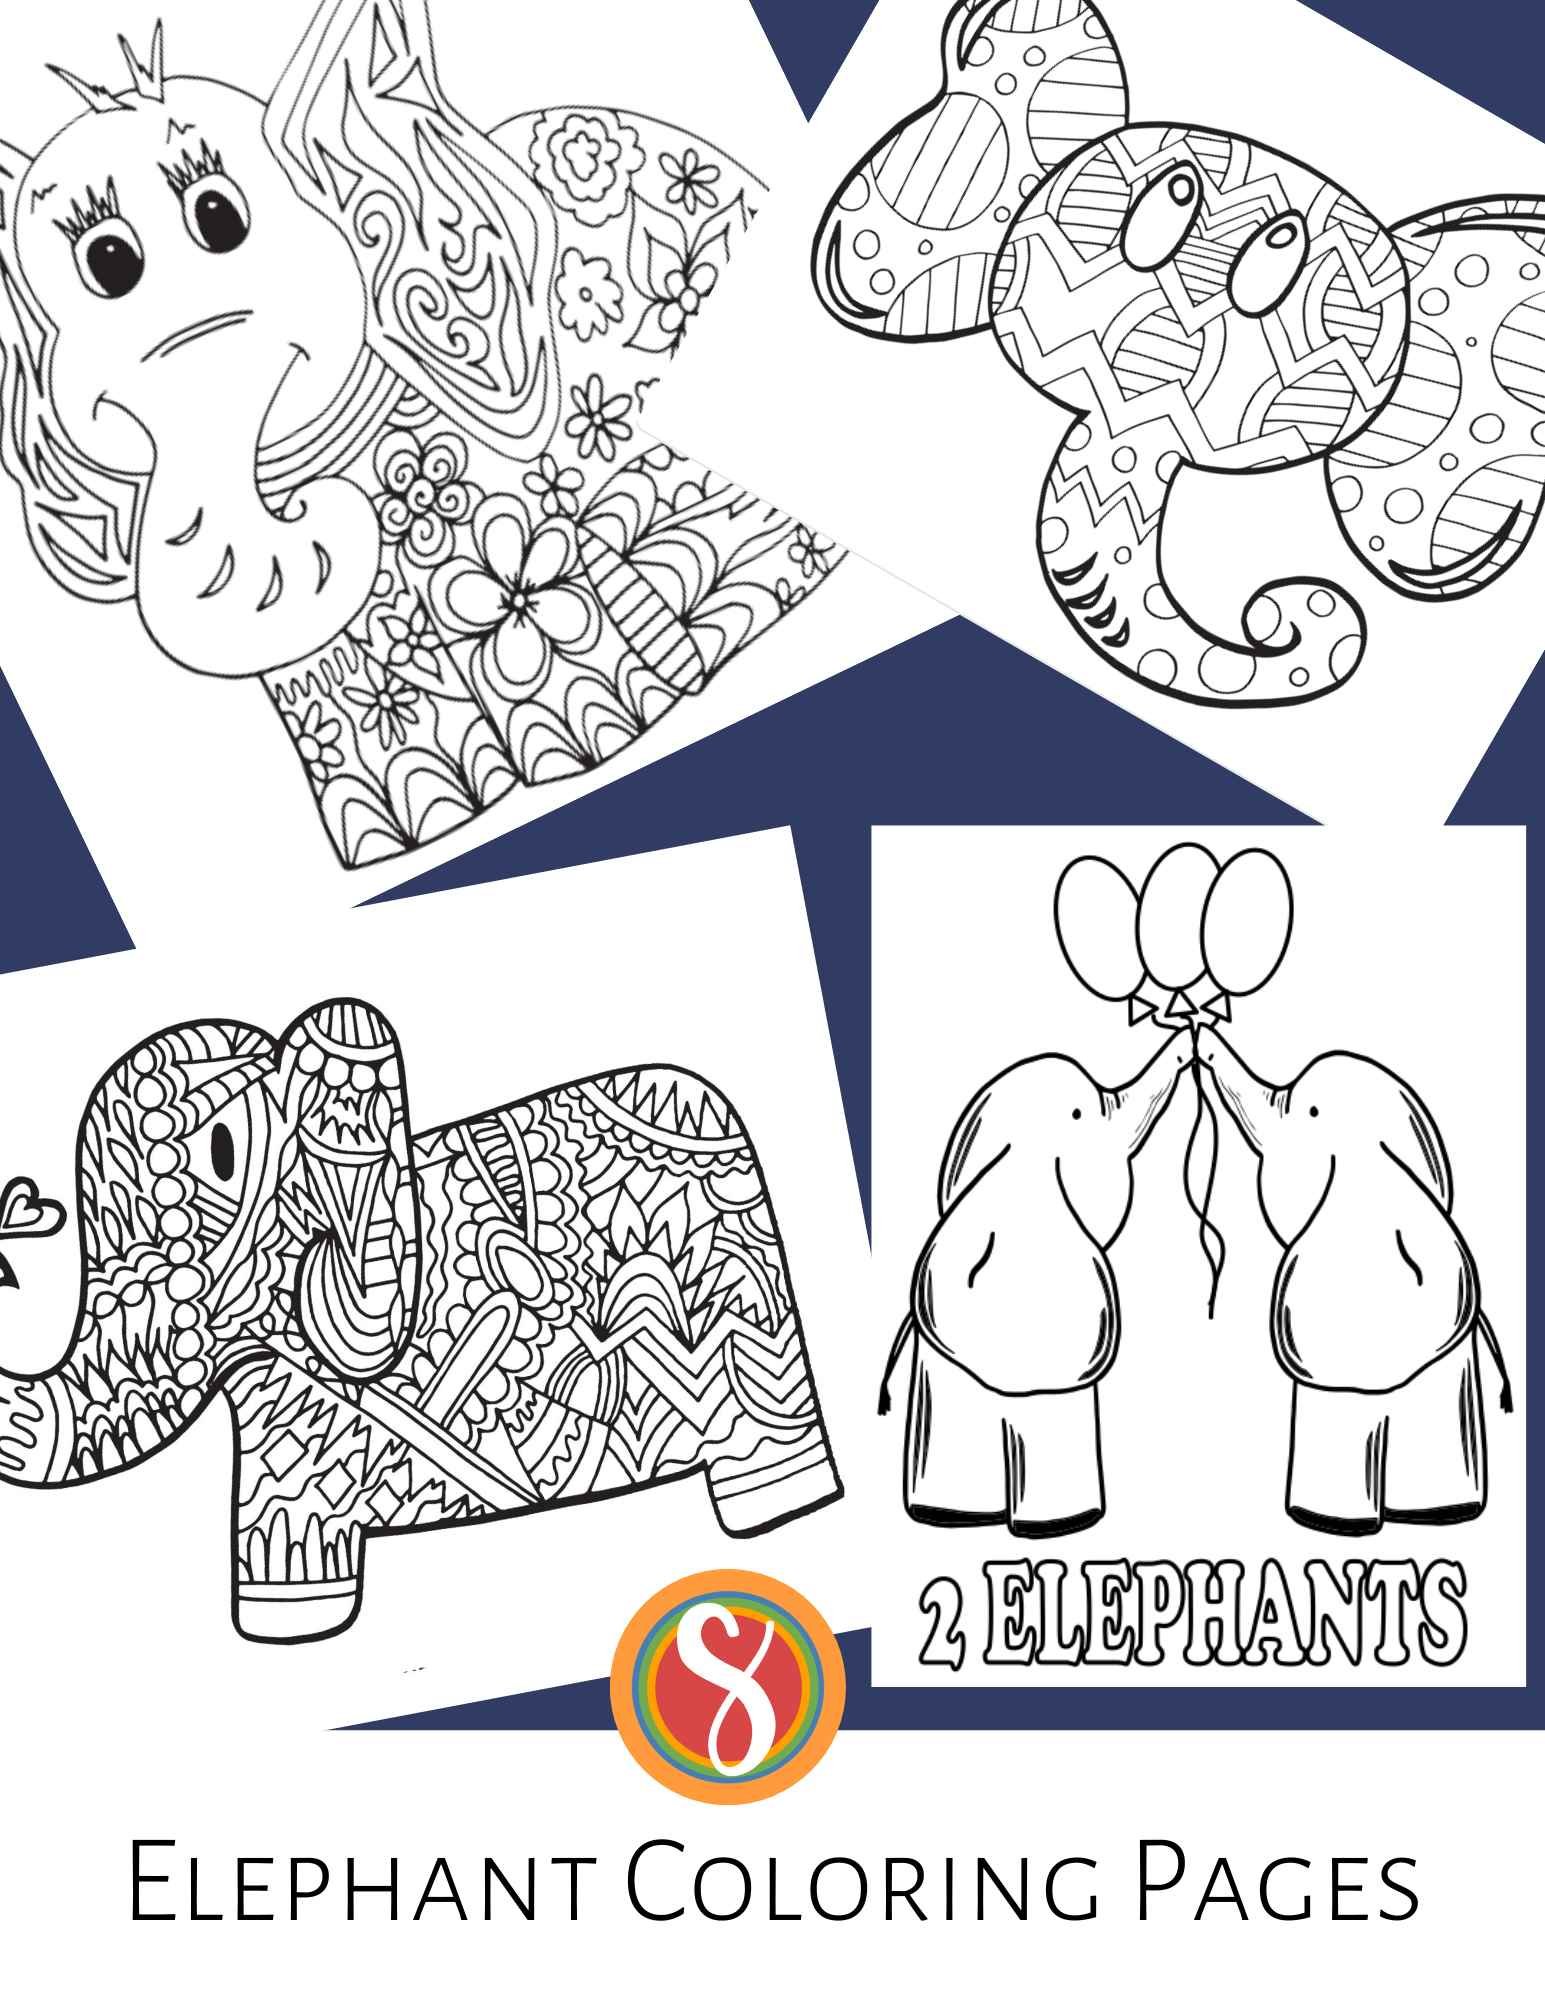 a collage of elephant coloring pages